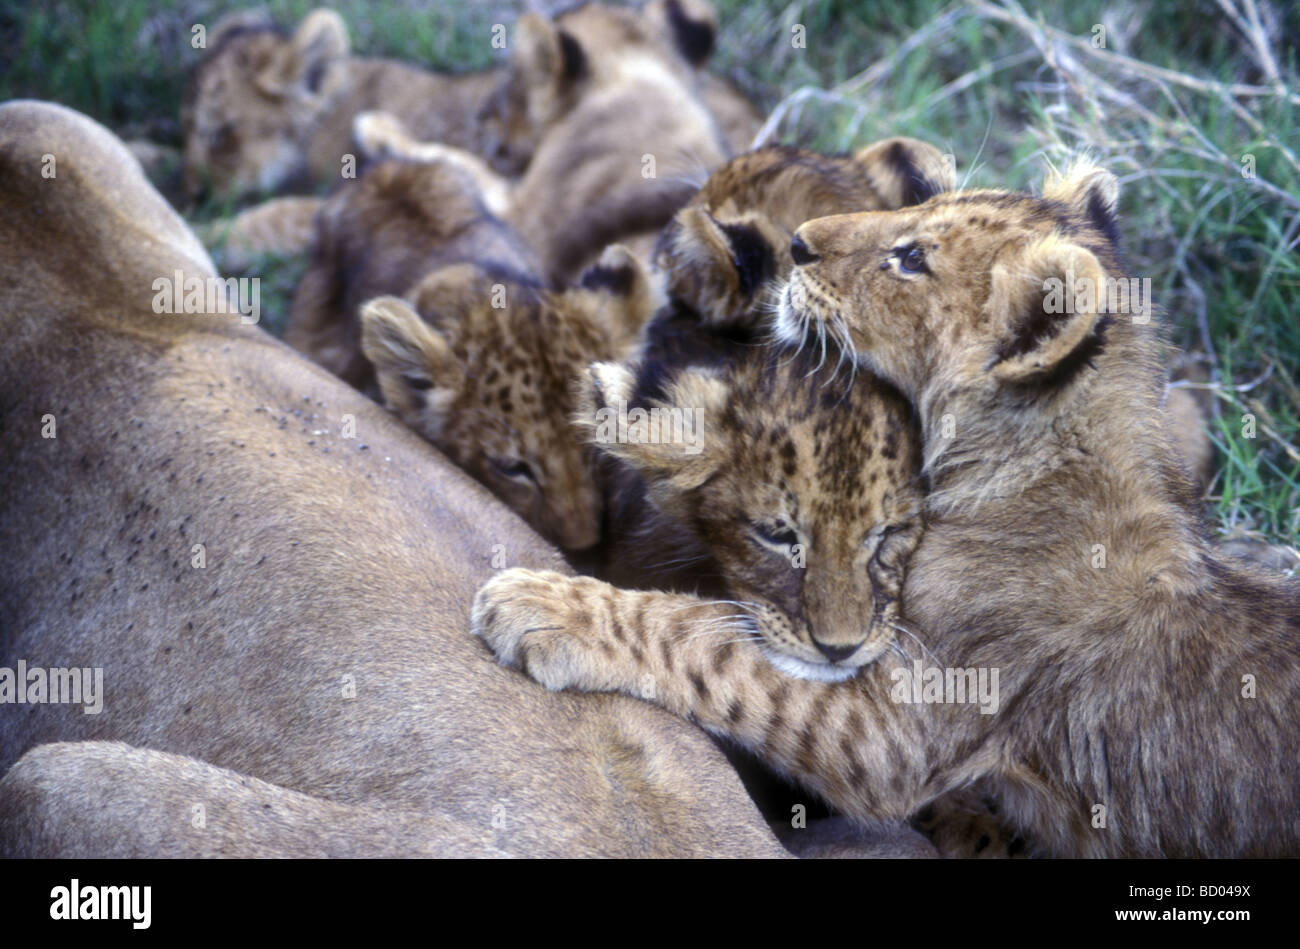 Close up of lion cubs snuggling together close to the mother Lioness Ngorongoro Crater Tanzania East Africa Stock Photo